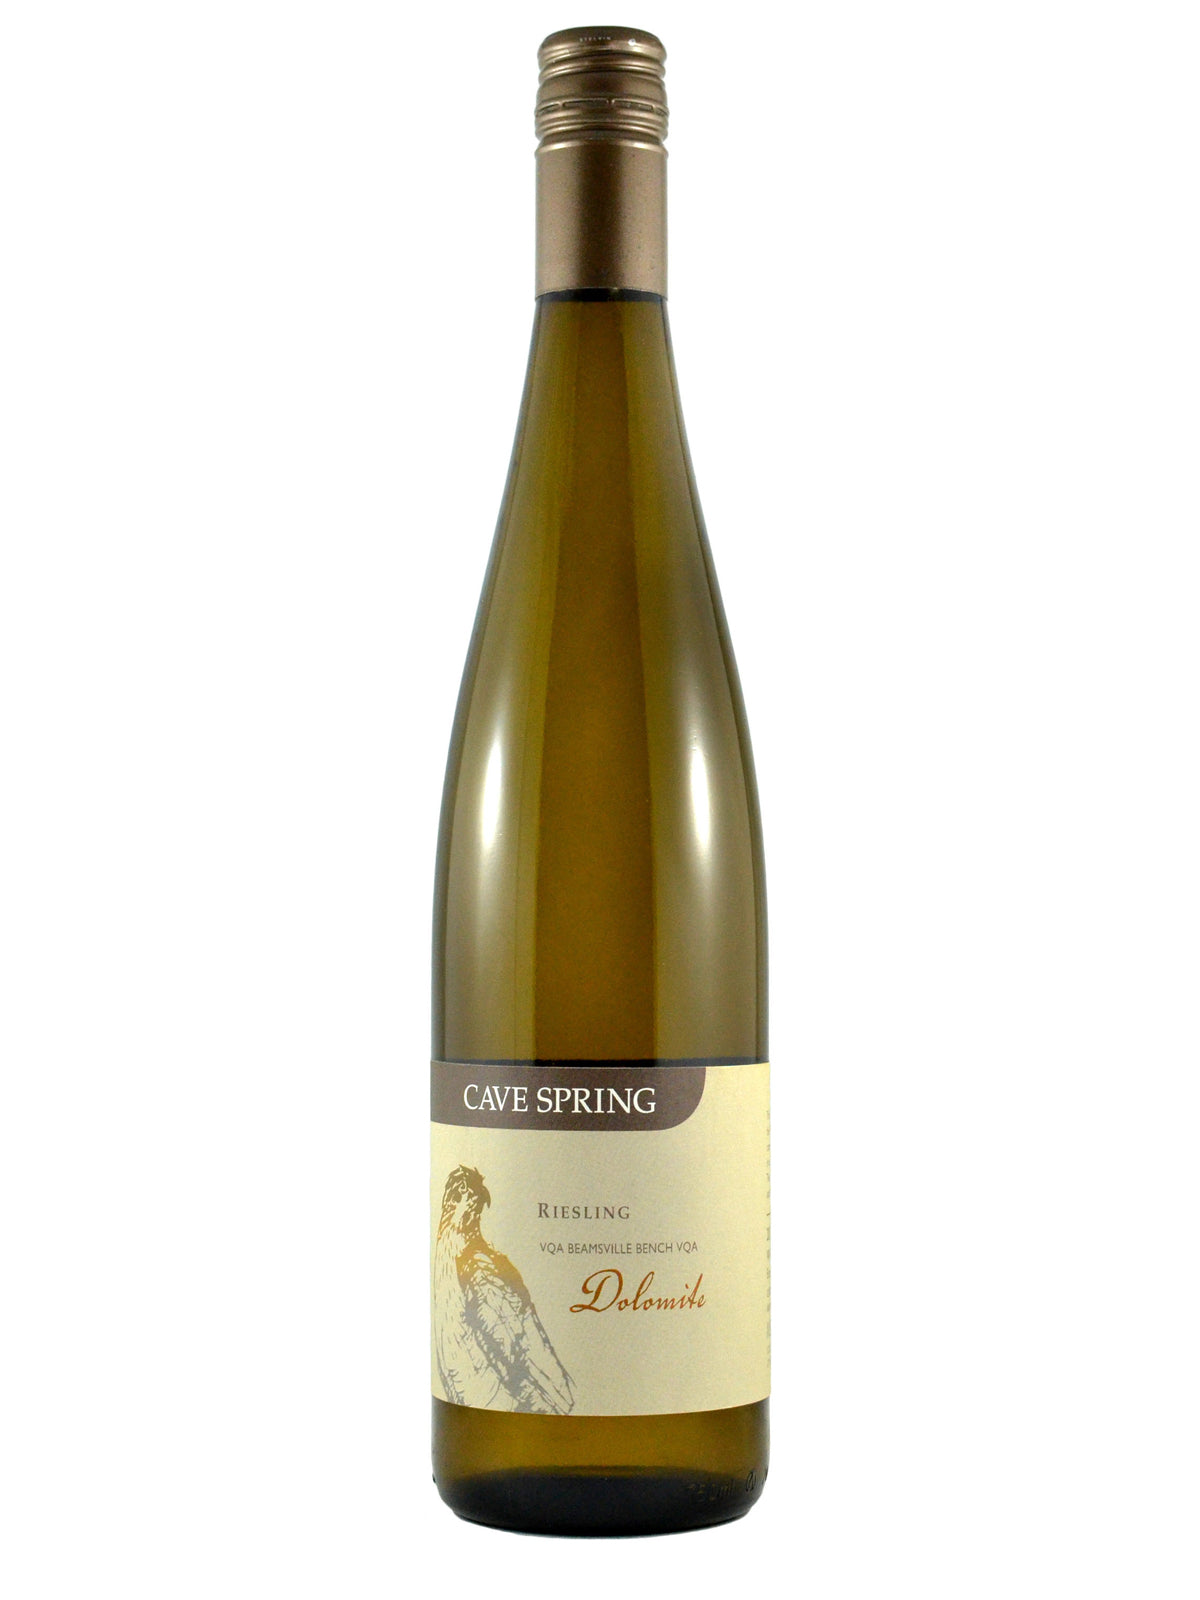 Cave Spring, Dolomite Riesling